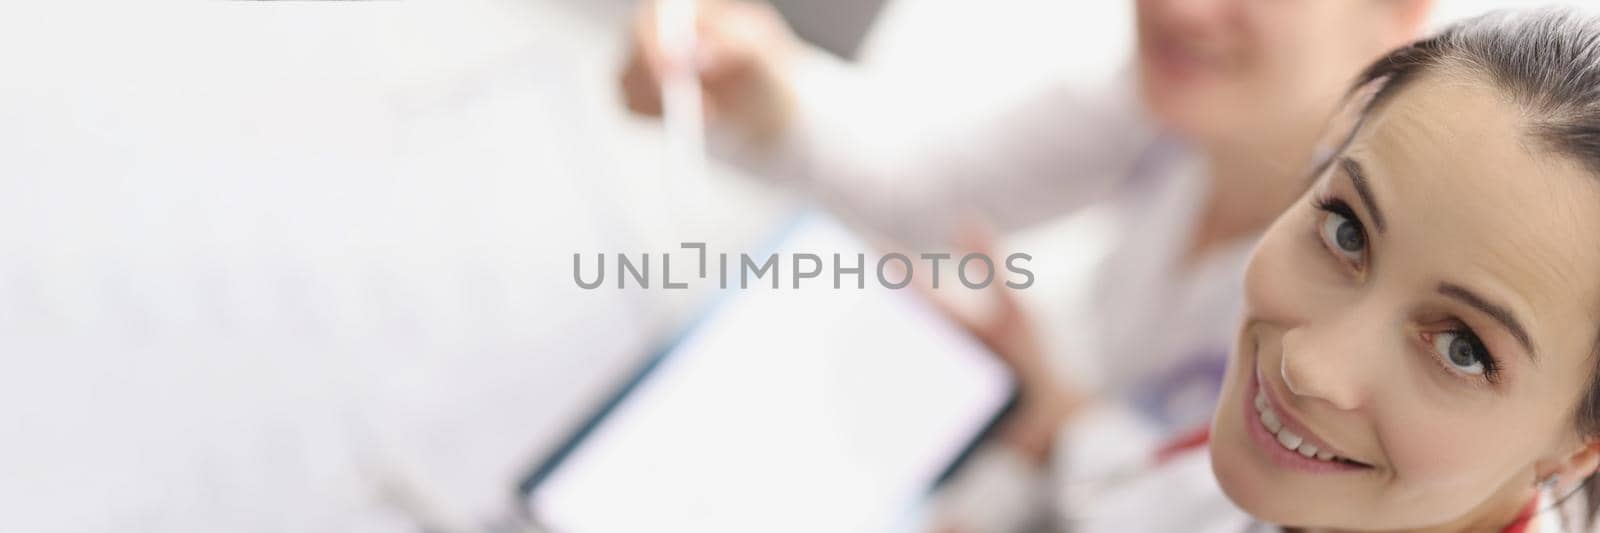 Top view of girls working in hospital spending break with tablet. Smiling nurse hold device with white screen, copy space. Pause from work, pastime, friendship, clinic concept. Blurred background